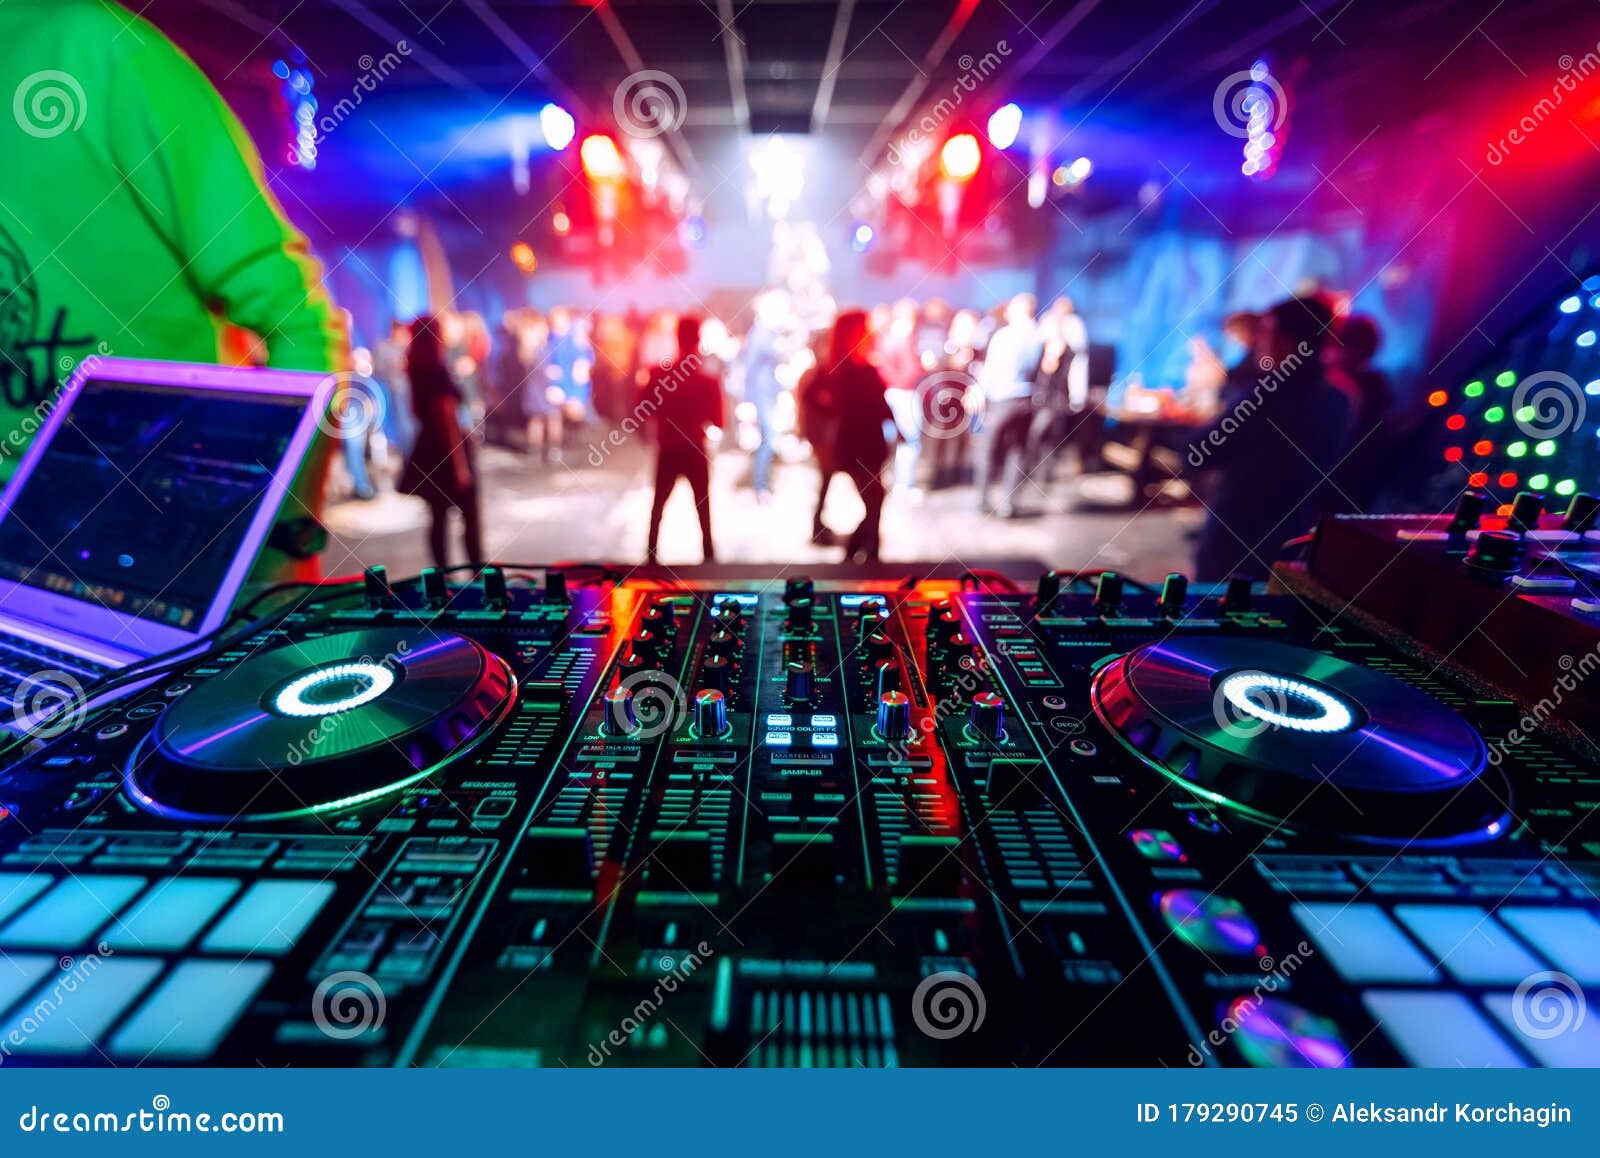 Målestok guitar Kriger Professional DJ Music Mixer at a Party at an Electronic Concert Stock Image  - Image of booth, music: 179290745